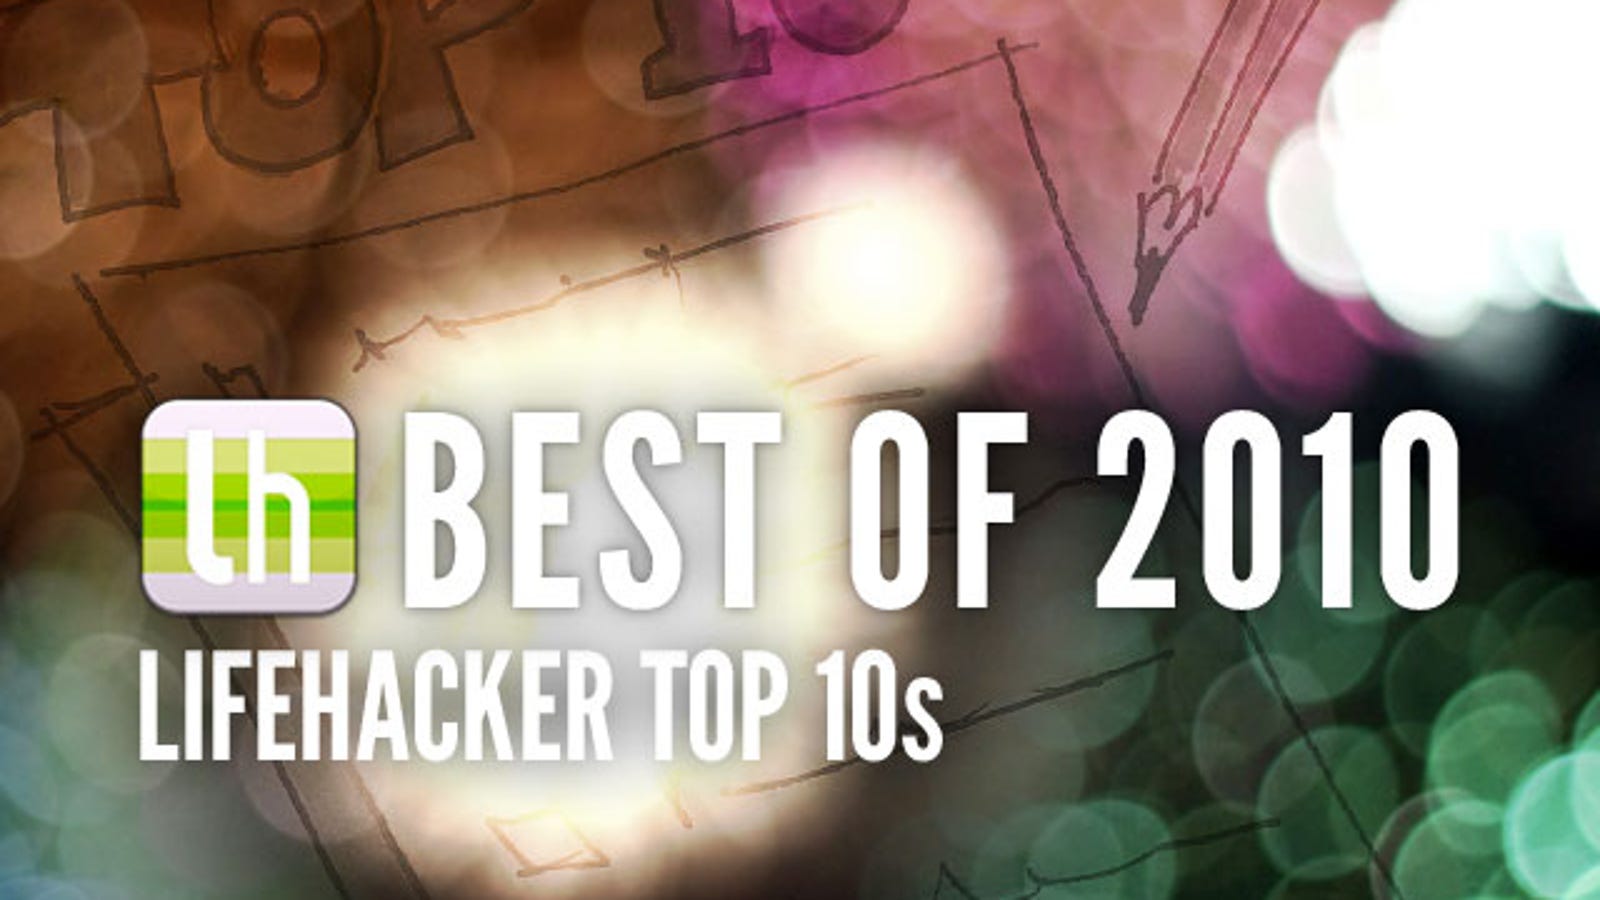 Most Popular Top 10s of 2010